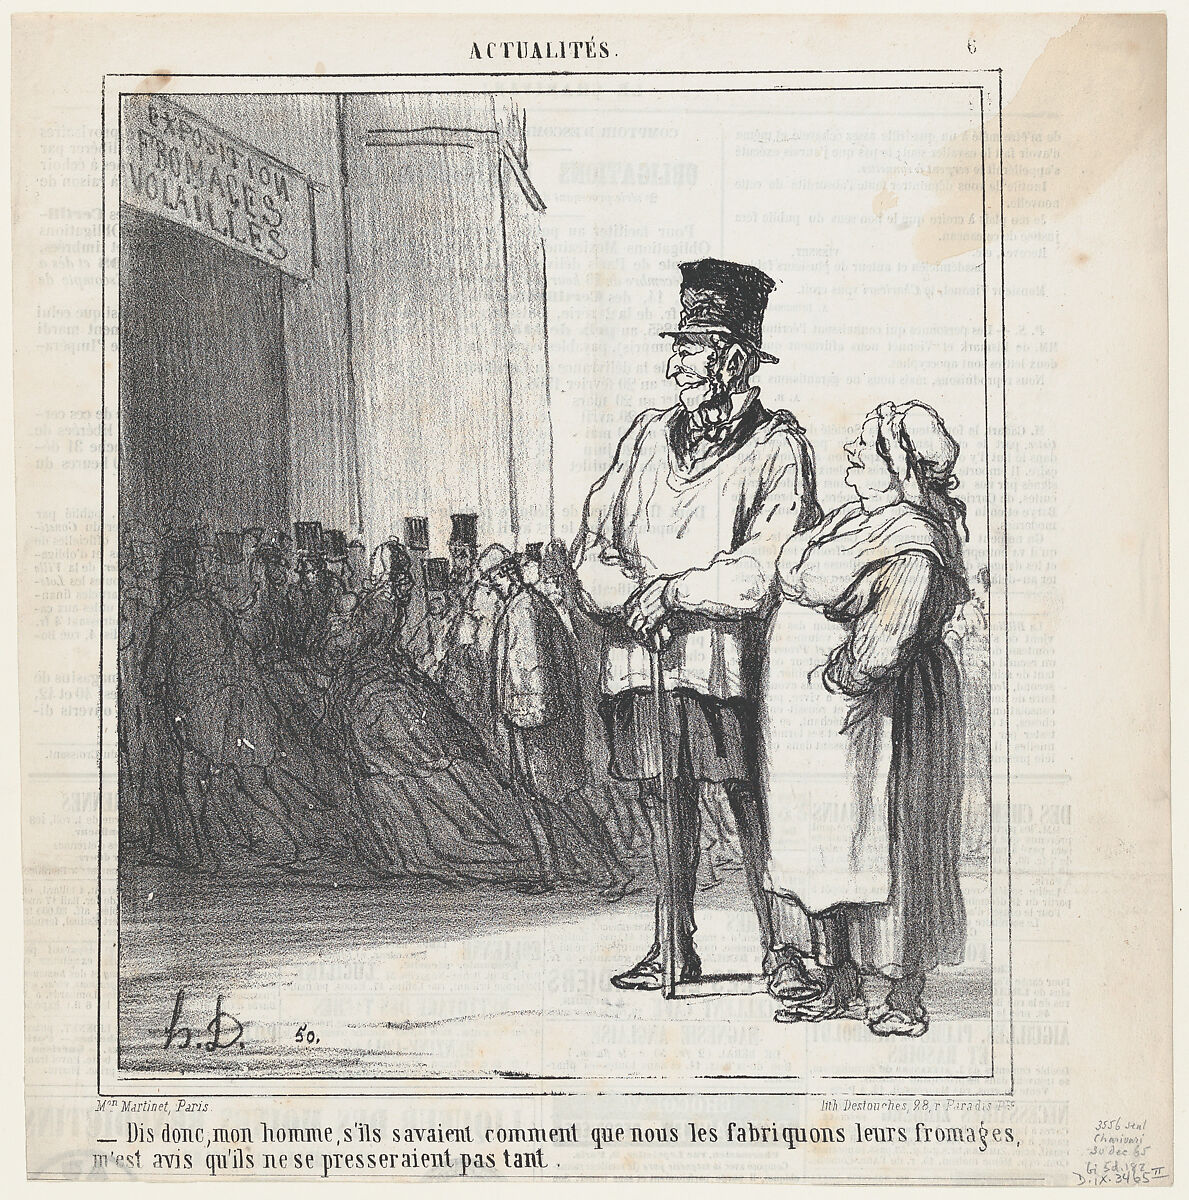 Just imagine my good fellow.... if they knew how we make their cheese, they surely wouldn't hurry so much, from 'News of the day,' published in Le Charivari, December 30, 1865, Honoré Daumier (French, Marseilles 1808–1879 Valmondois), Lithograph on newsprint; second state of two (Delteil) 